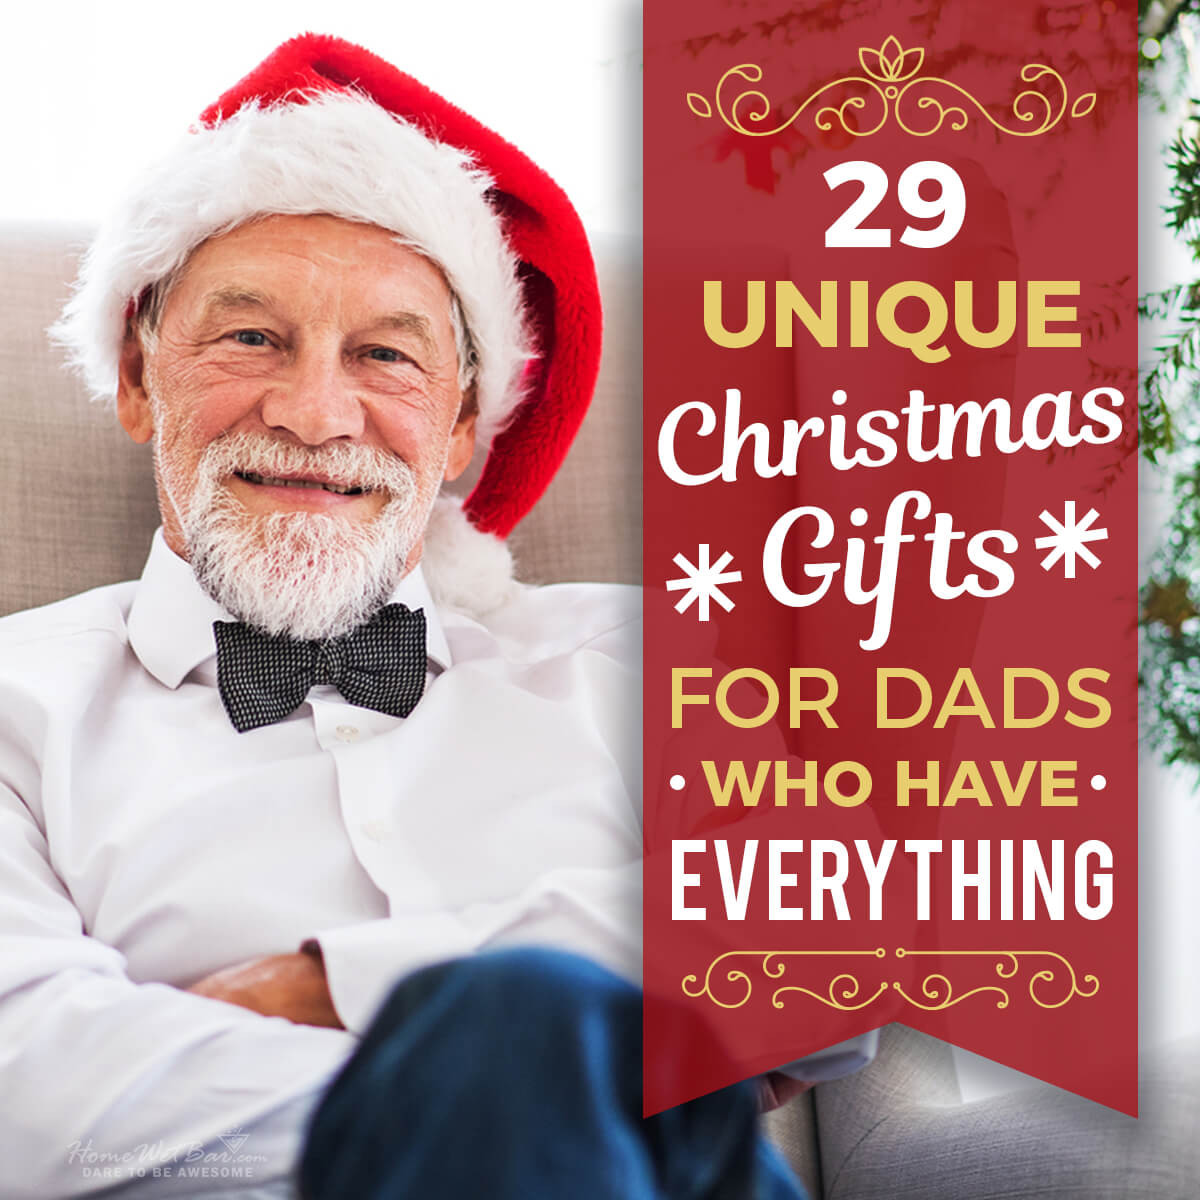 Cool Christmas Gift For Dad
 29 Unique Christmas Gifts for Dads Who Have Everything